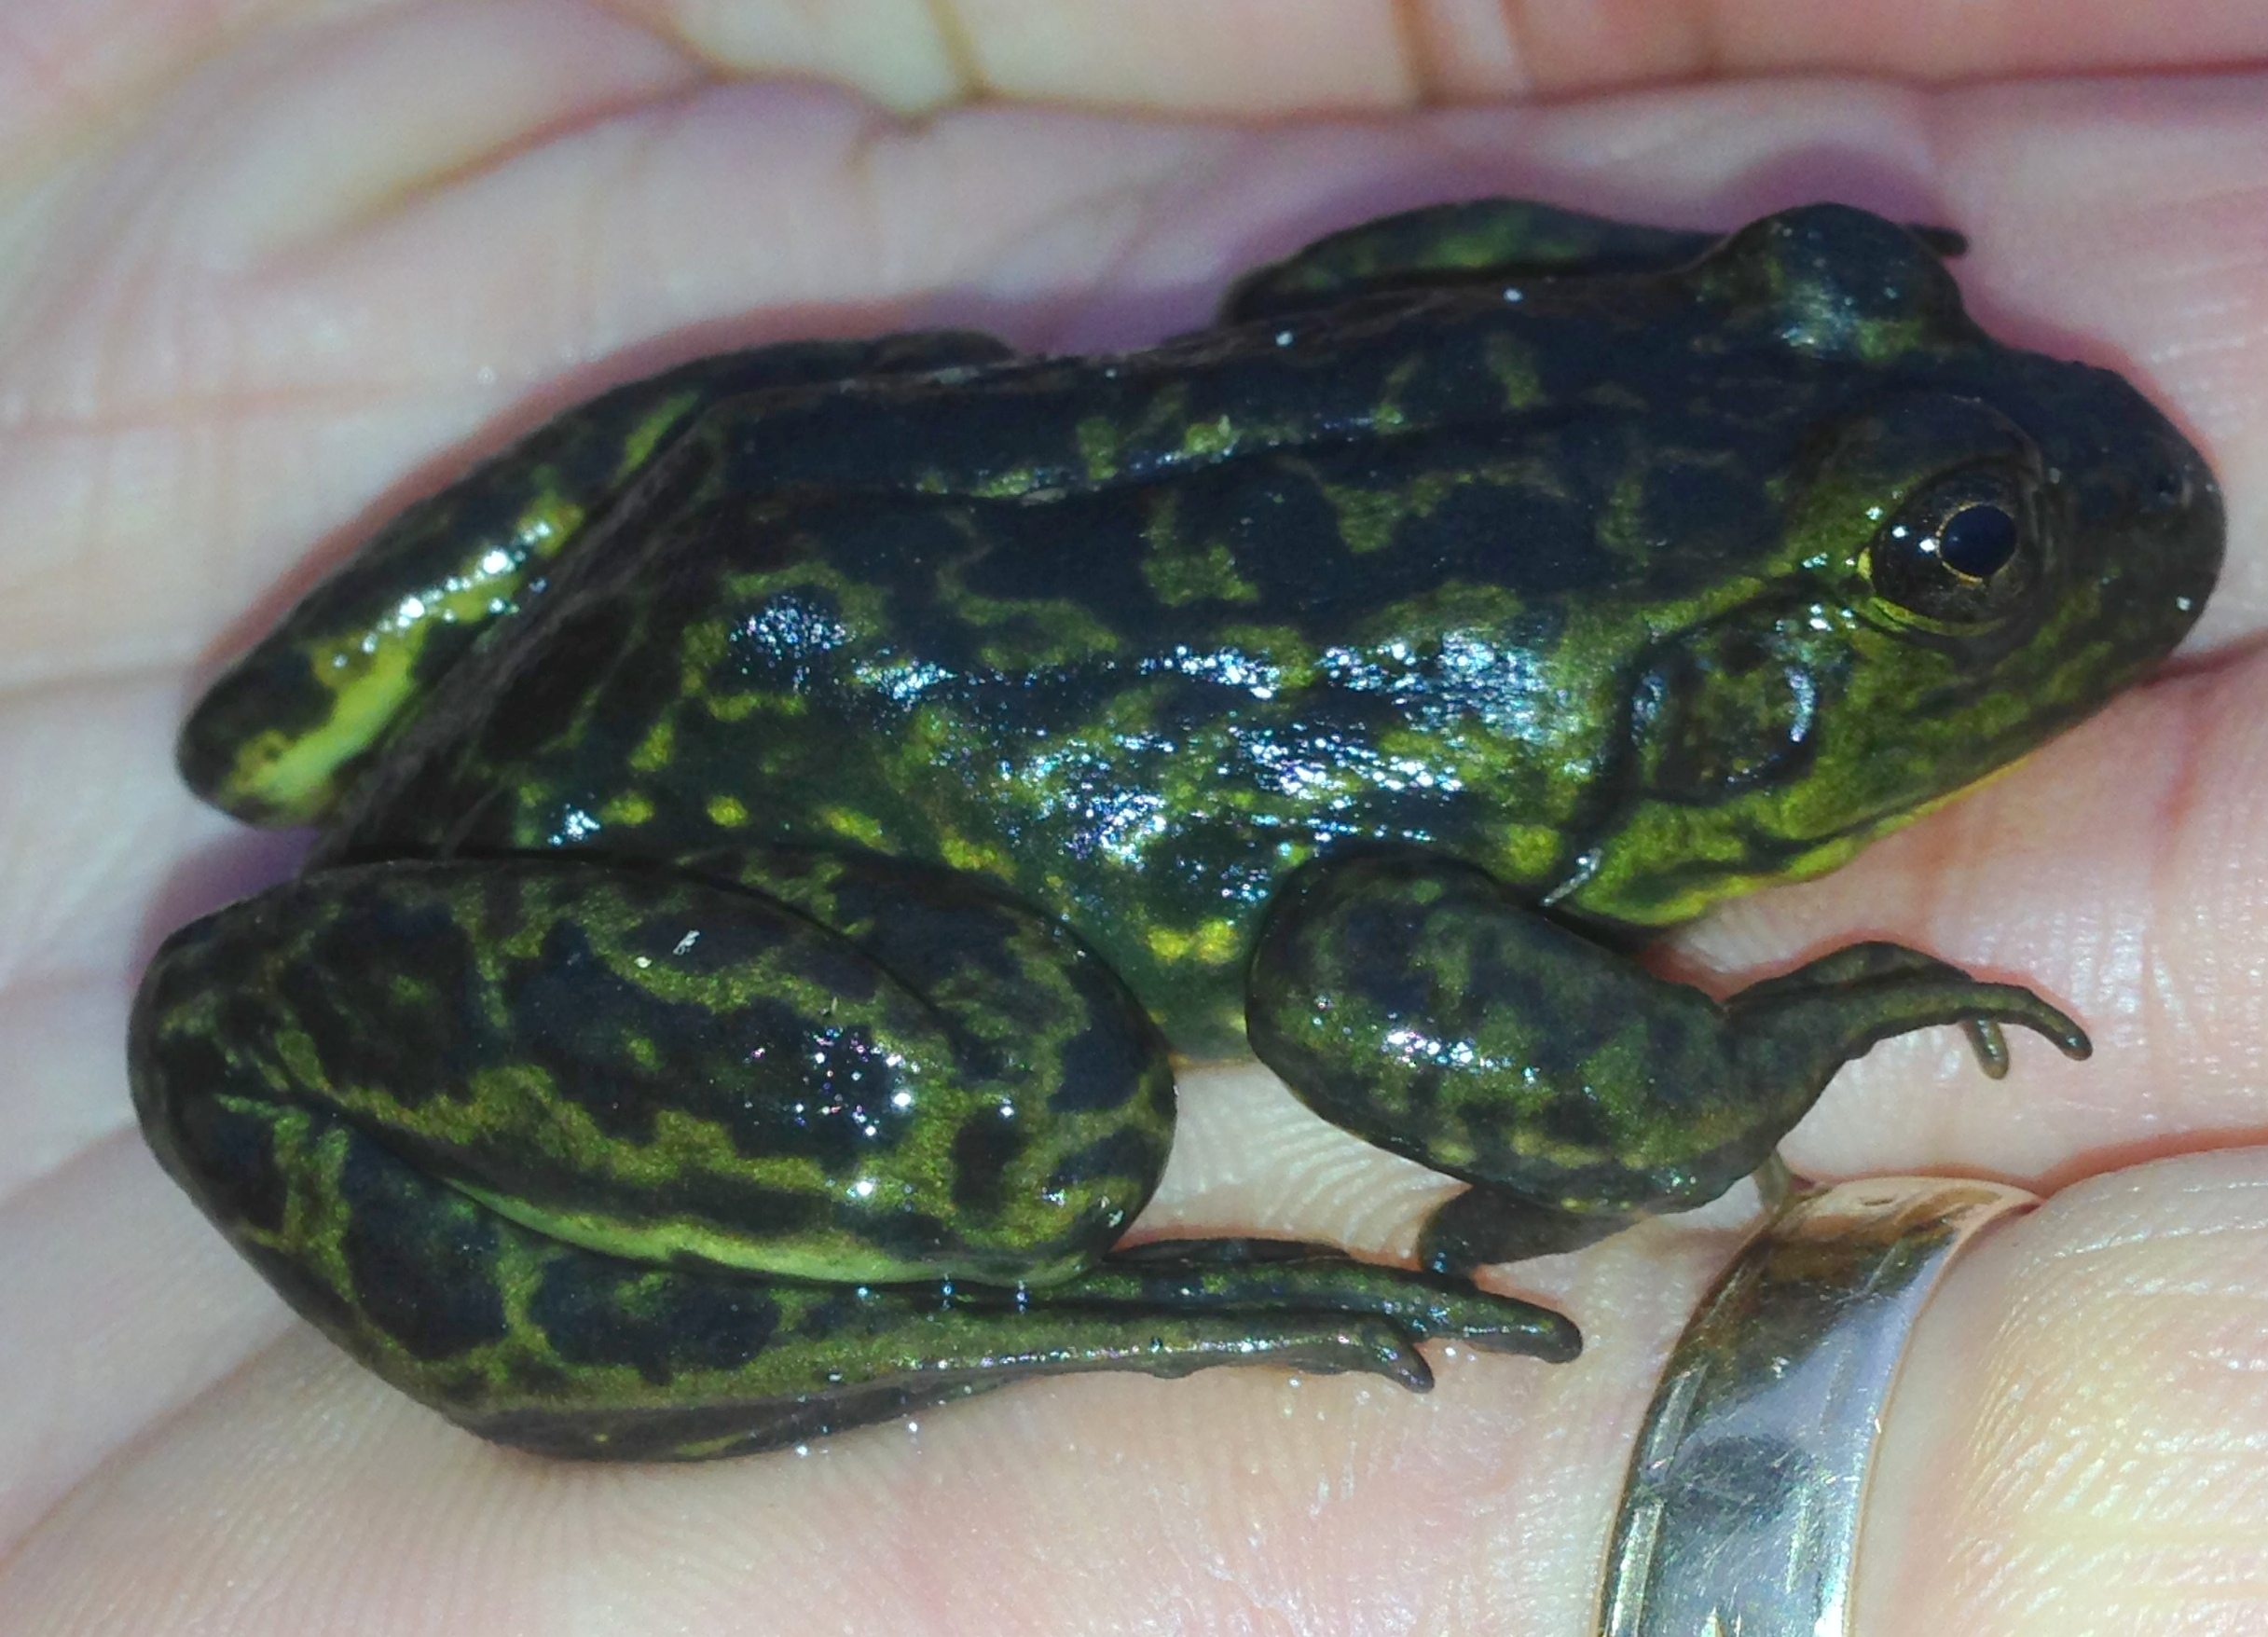 A Mink Frog on a hand in winter